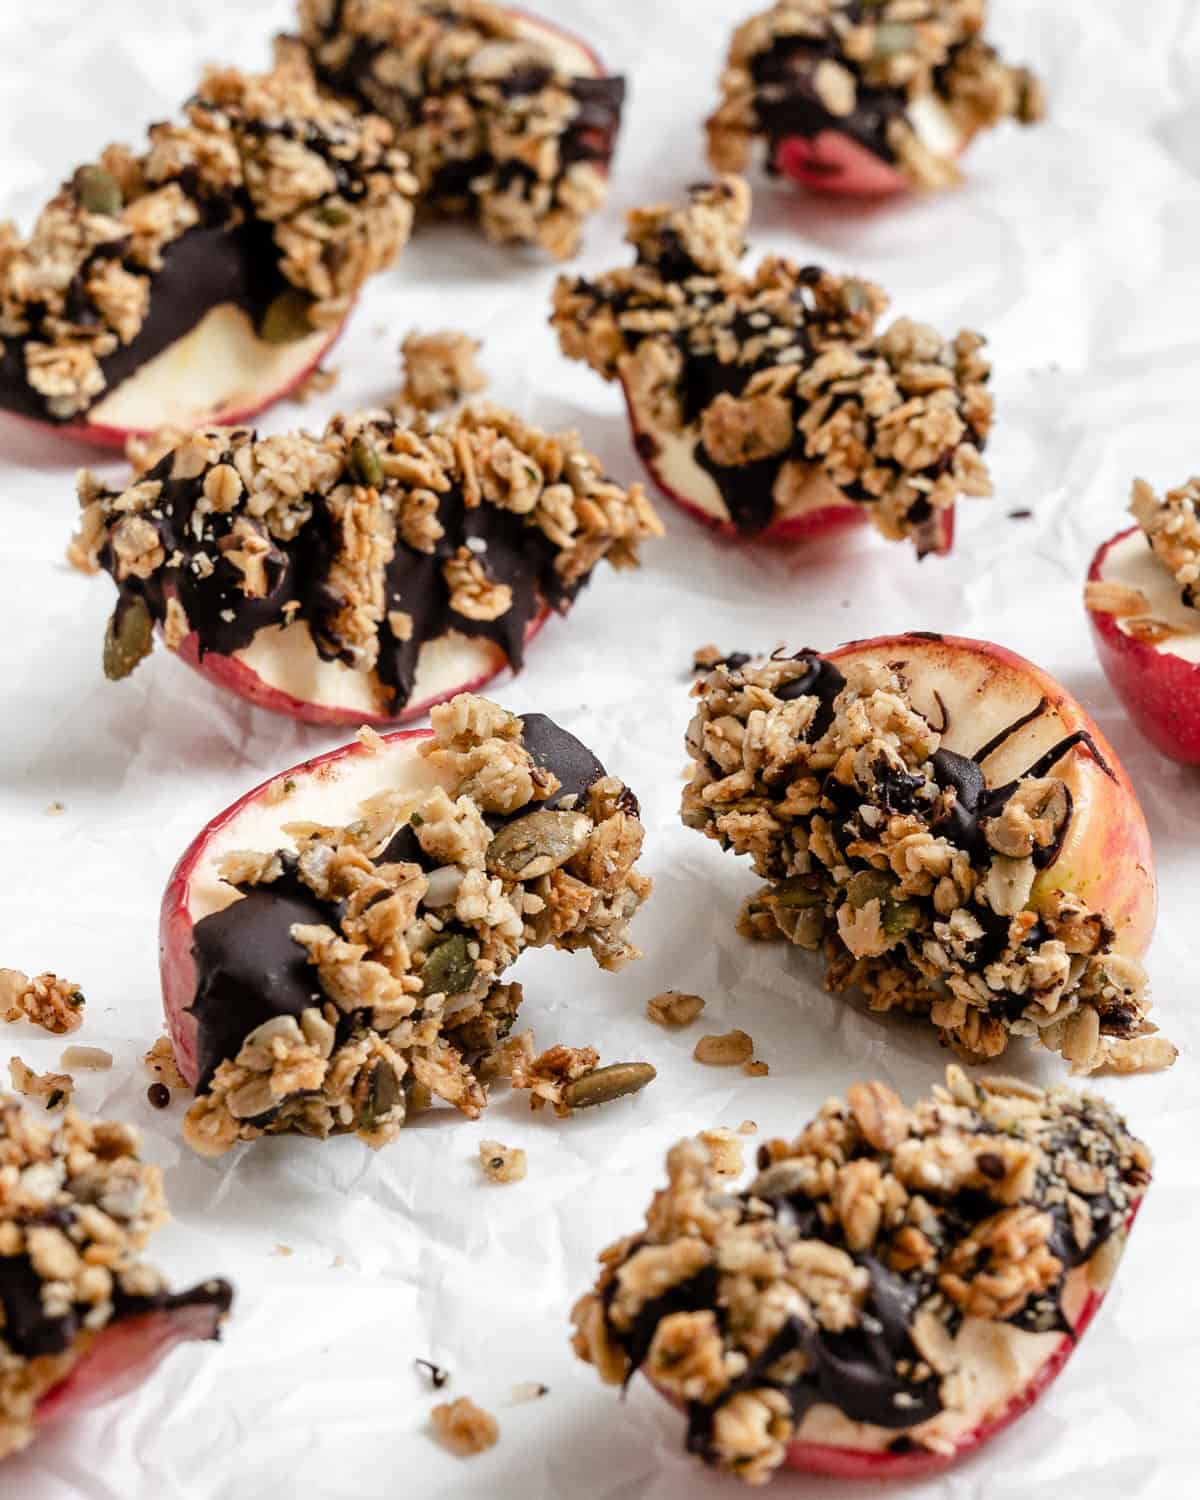 several completed Healthy Apple Snacks with Granola against a white surface